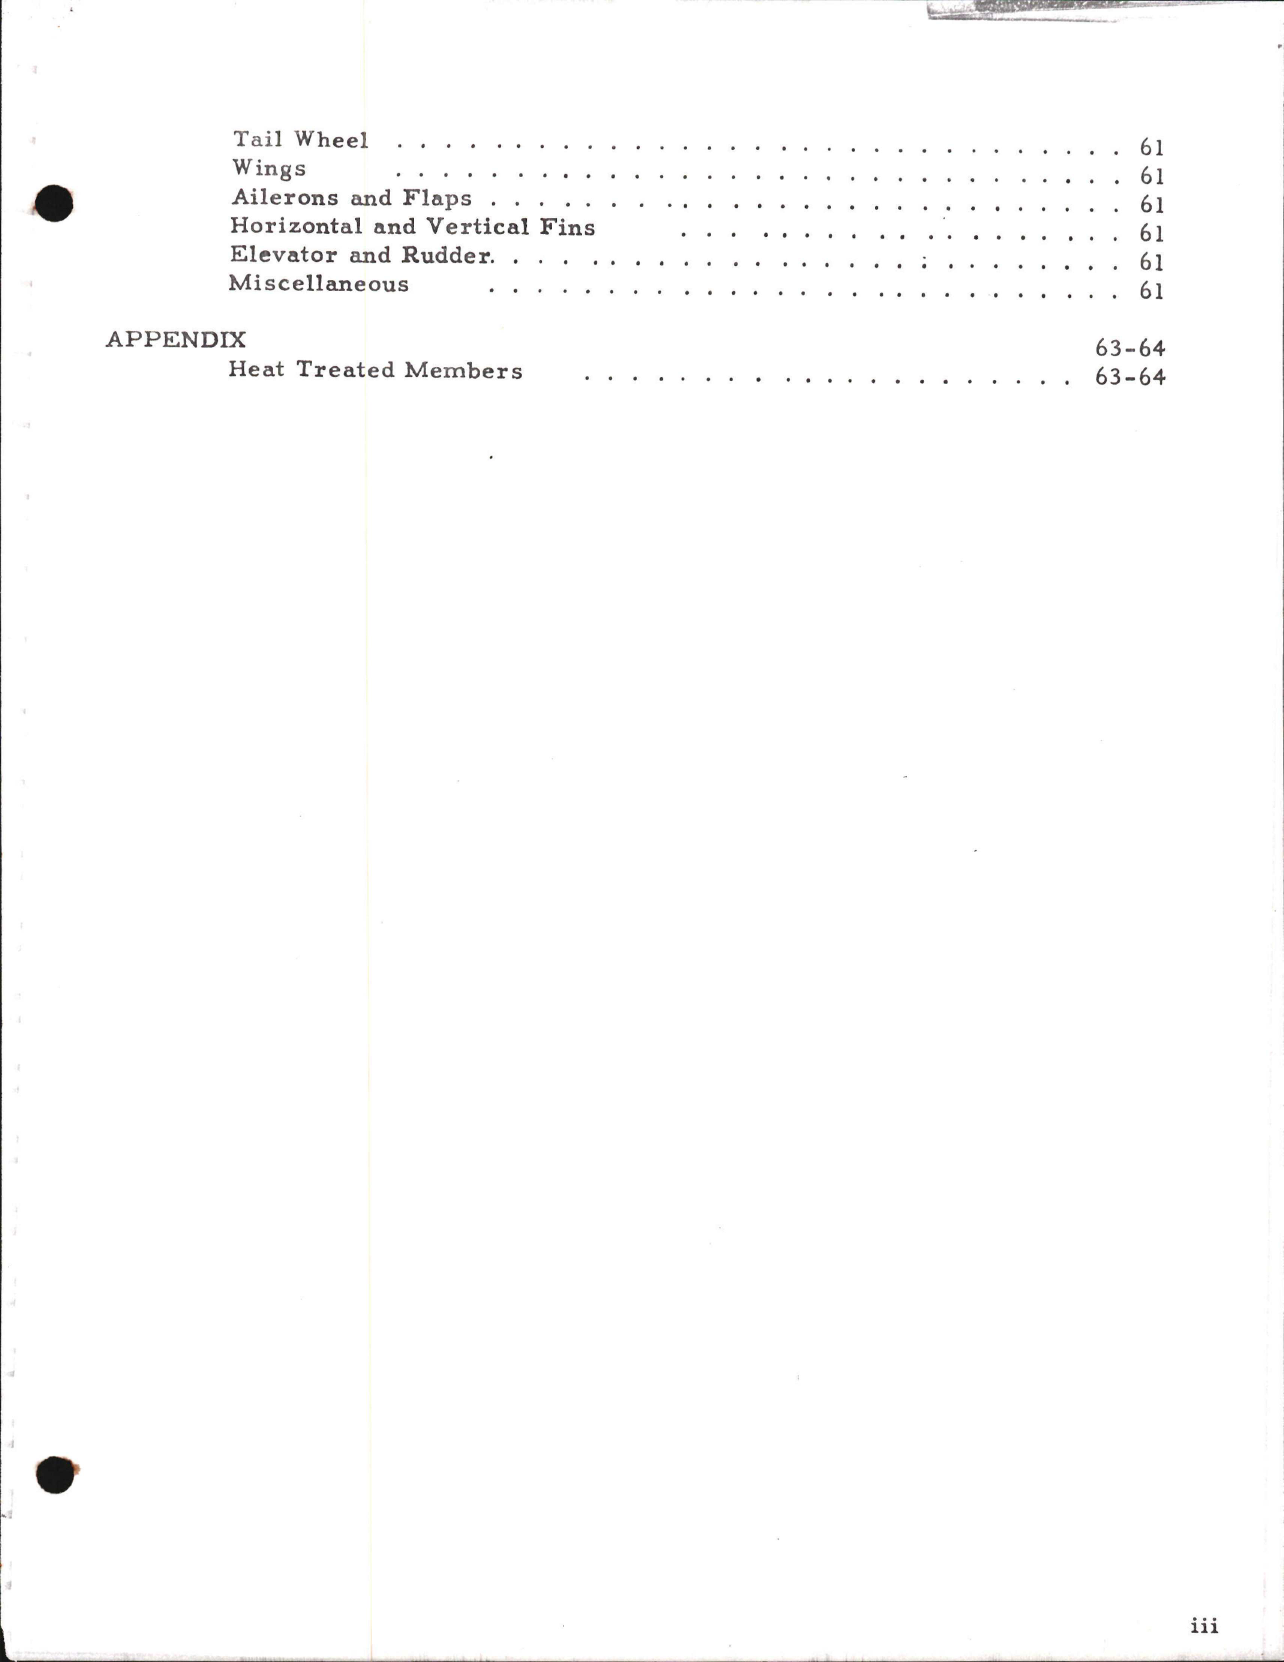 Sample page 7 from AirCorps Library document: Beechcraft Model G17S Maintenance Manual